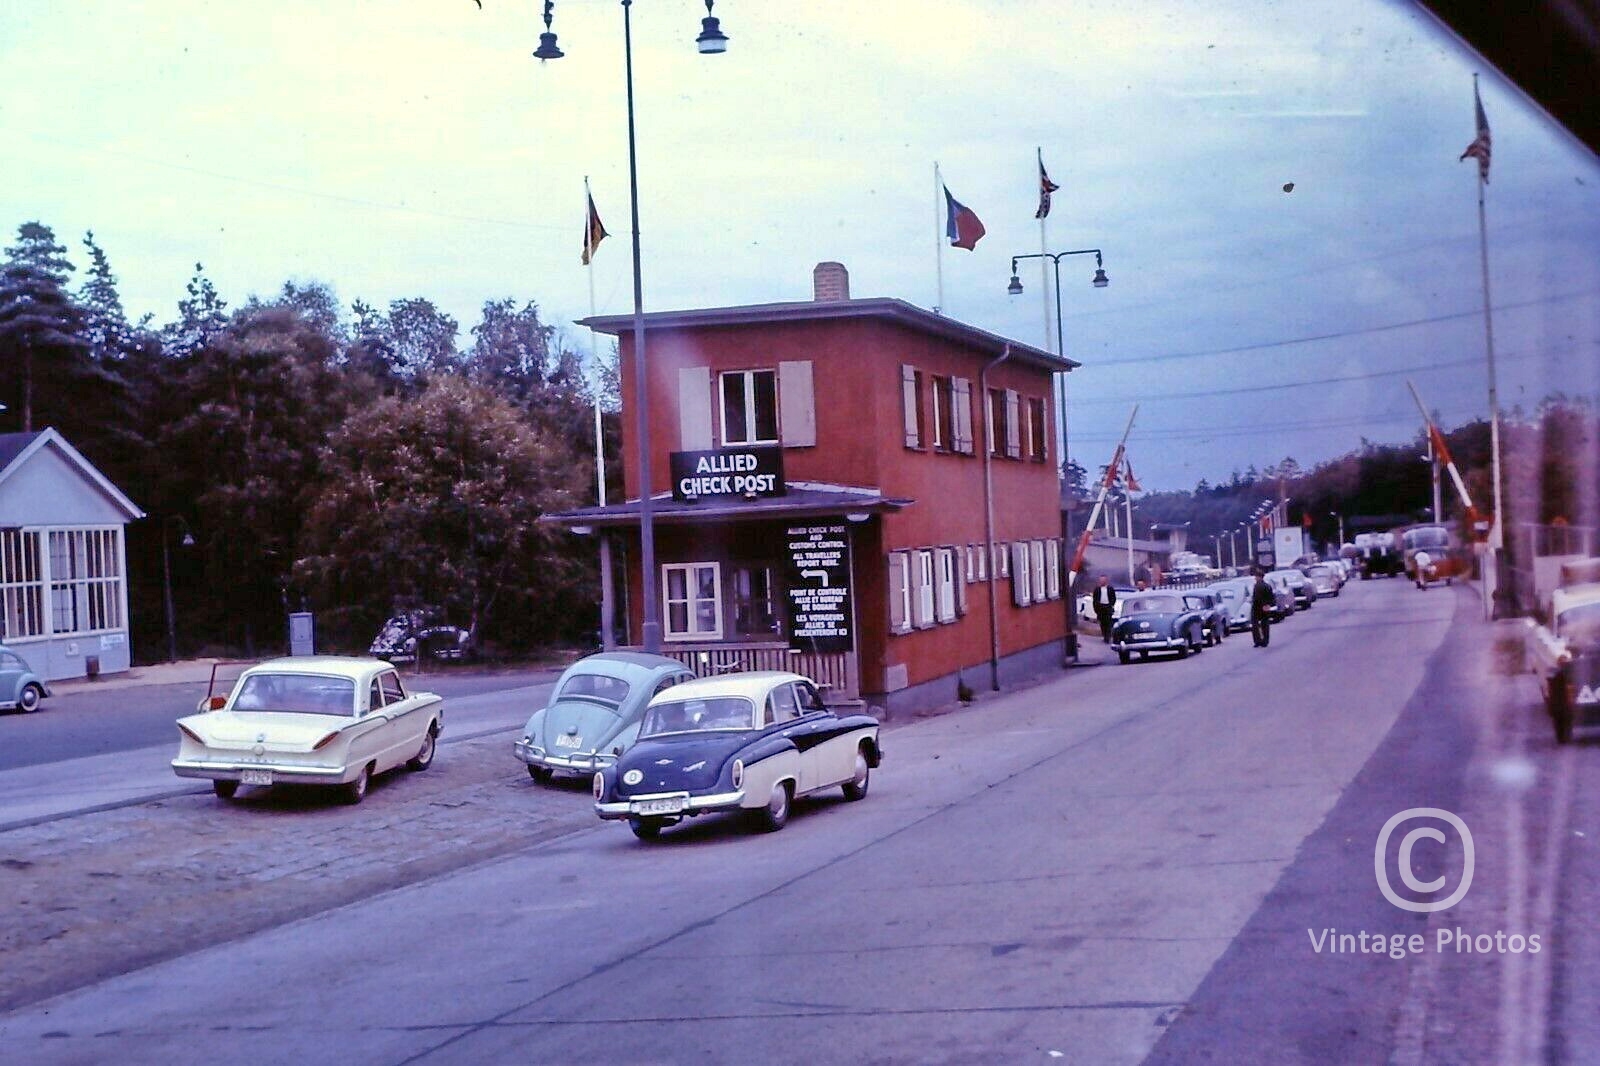 1961 Helmstedt Check Point Crossing